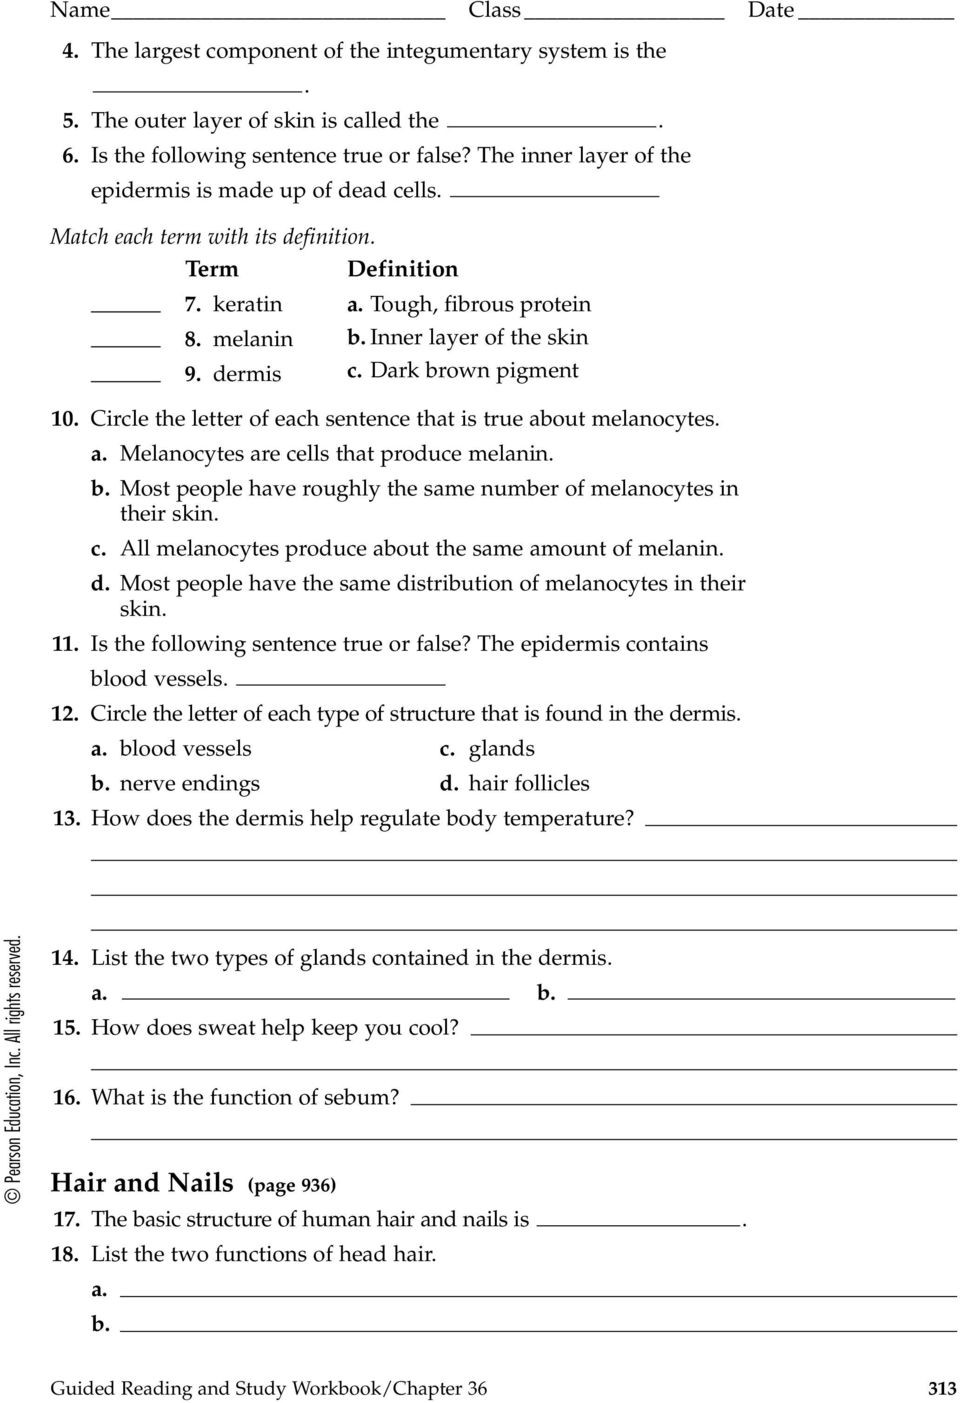 Integumentary System Worksheet Answers Skeletal Muscular and Integumentary Systems Pdf Free